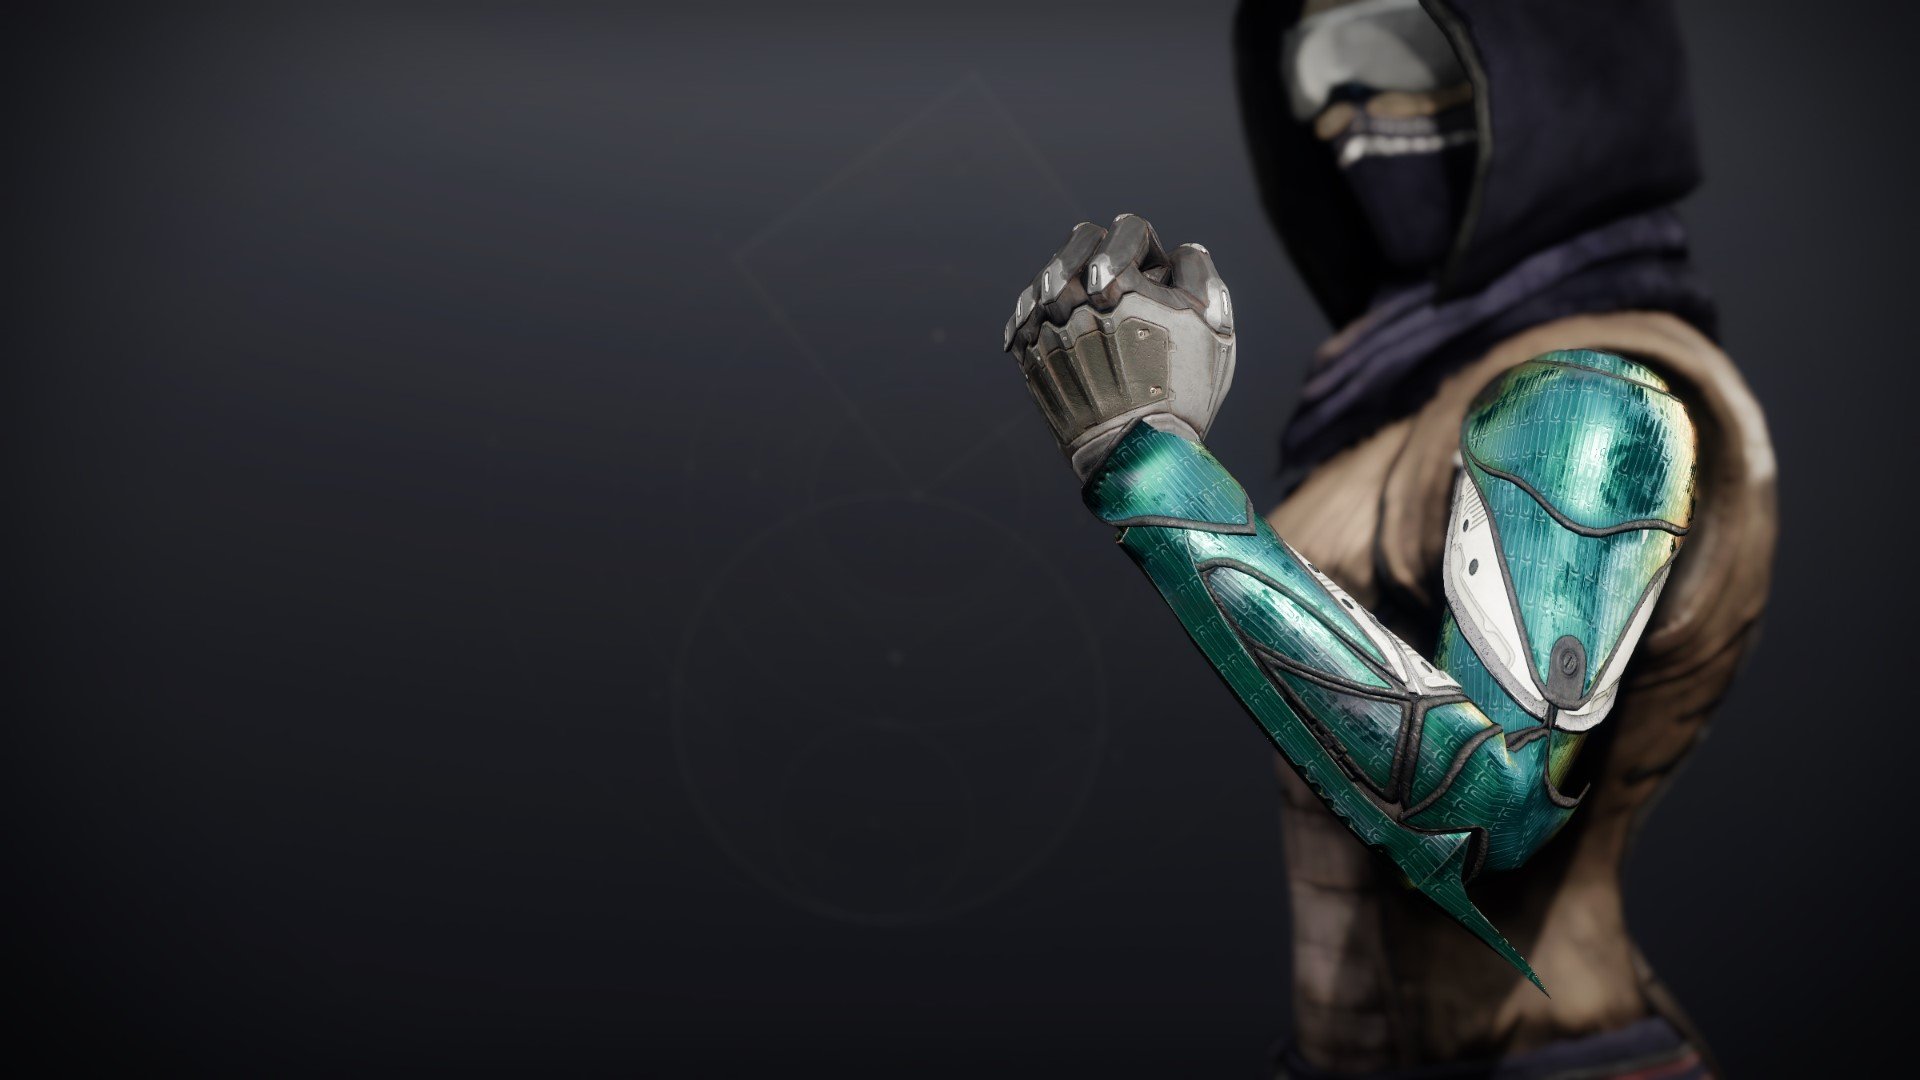 Destiny 2 Is Updating 24 Exotic Armor Pieces In Season 21, Here's Everything New